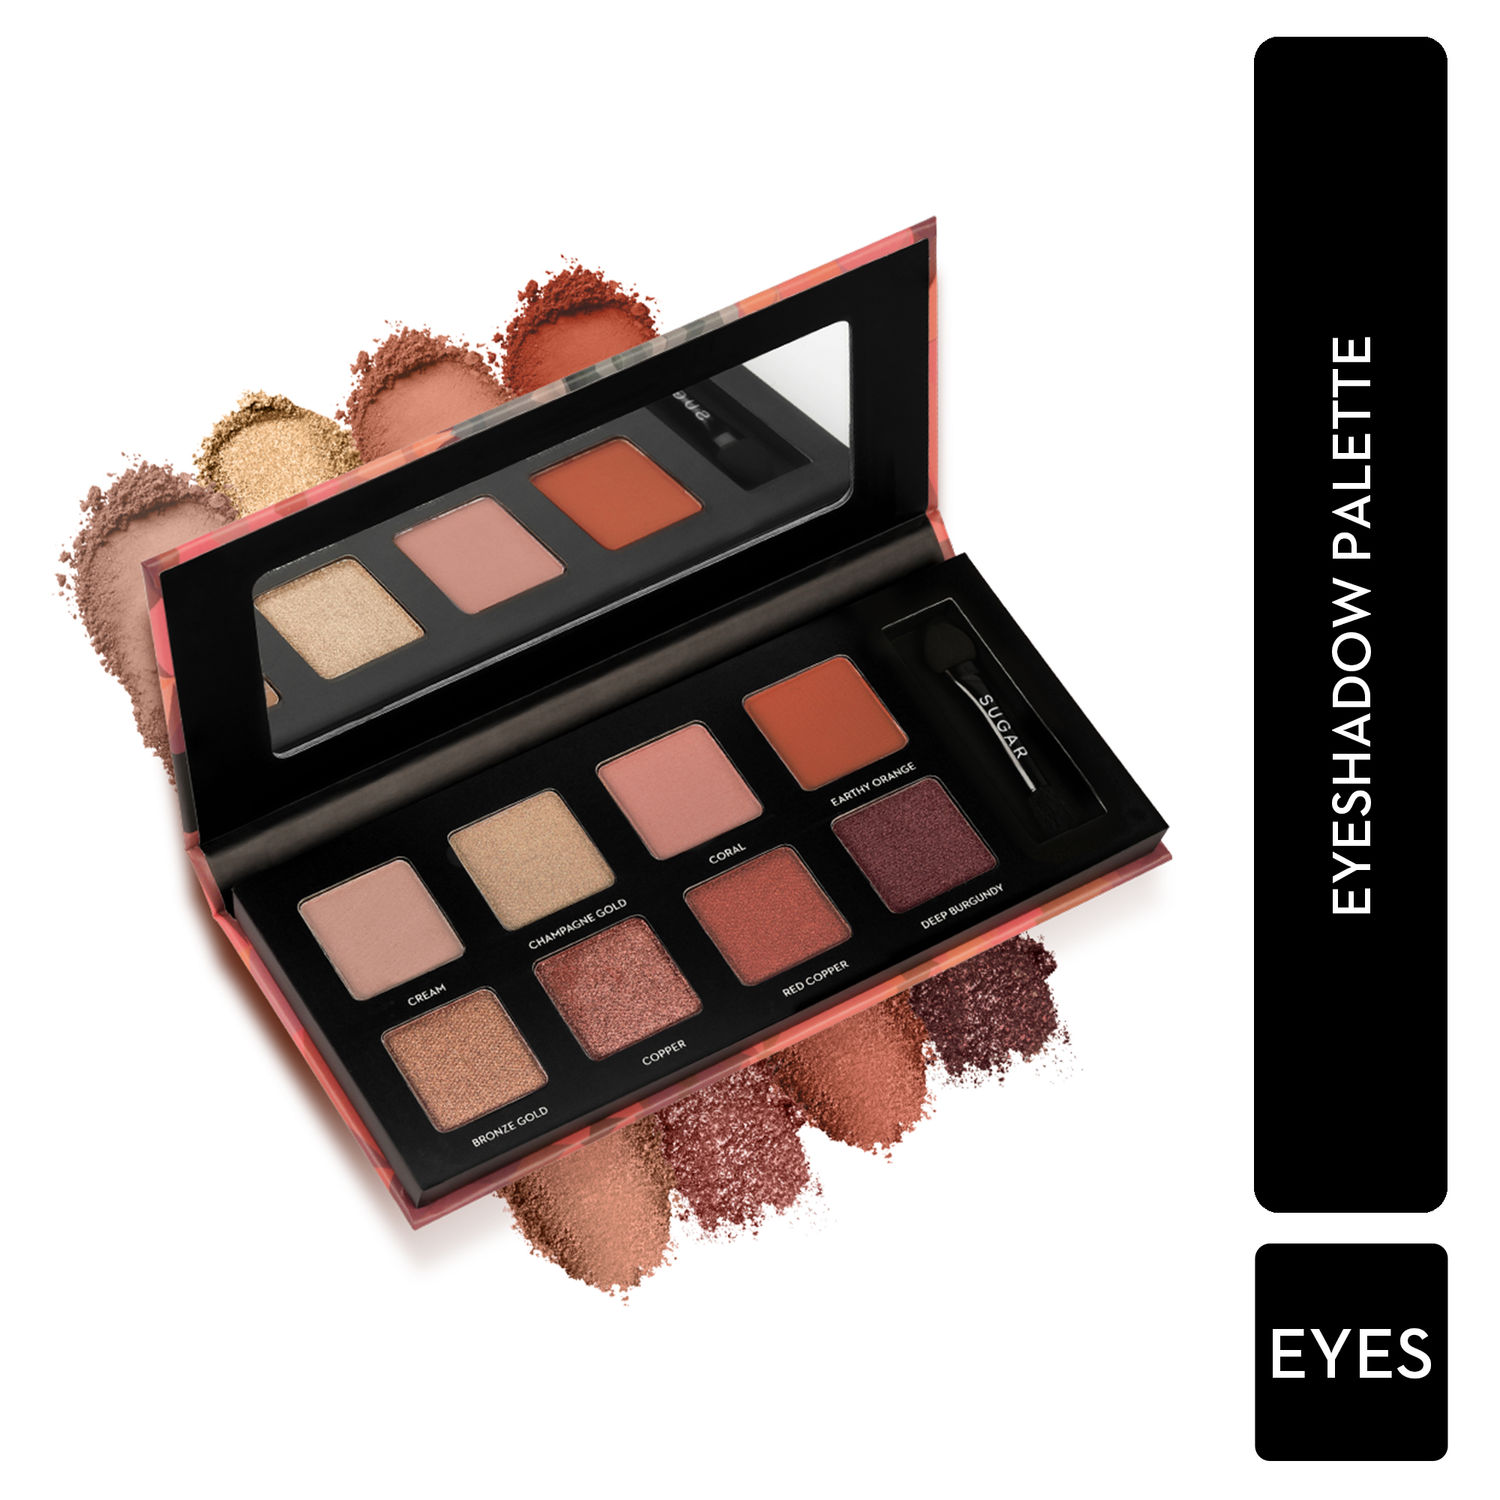 Buy SUGAR Cosmetics - Blend The Rules - Eyeshadow Palette - 01 Flawless (8 Warm Neutral Shades) - Long Lasting, Smudge Proof Eyeshadow for Smoky Eye Look, Paraben-Free - Purplle